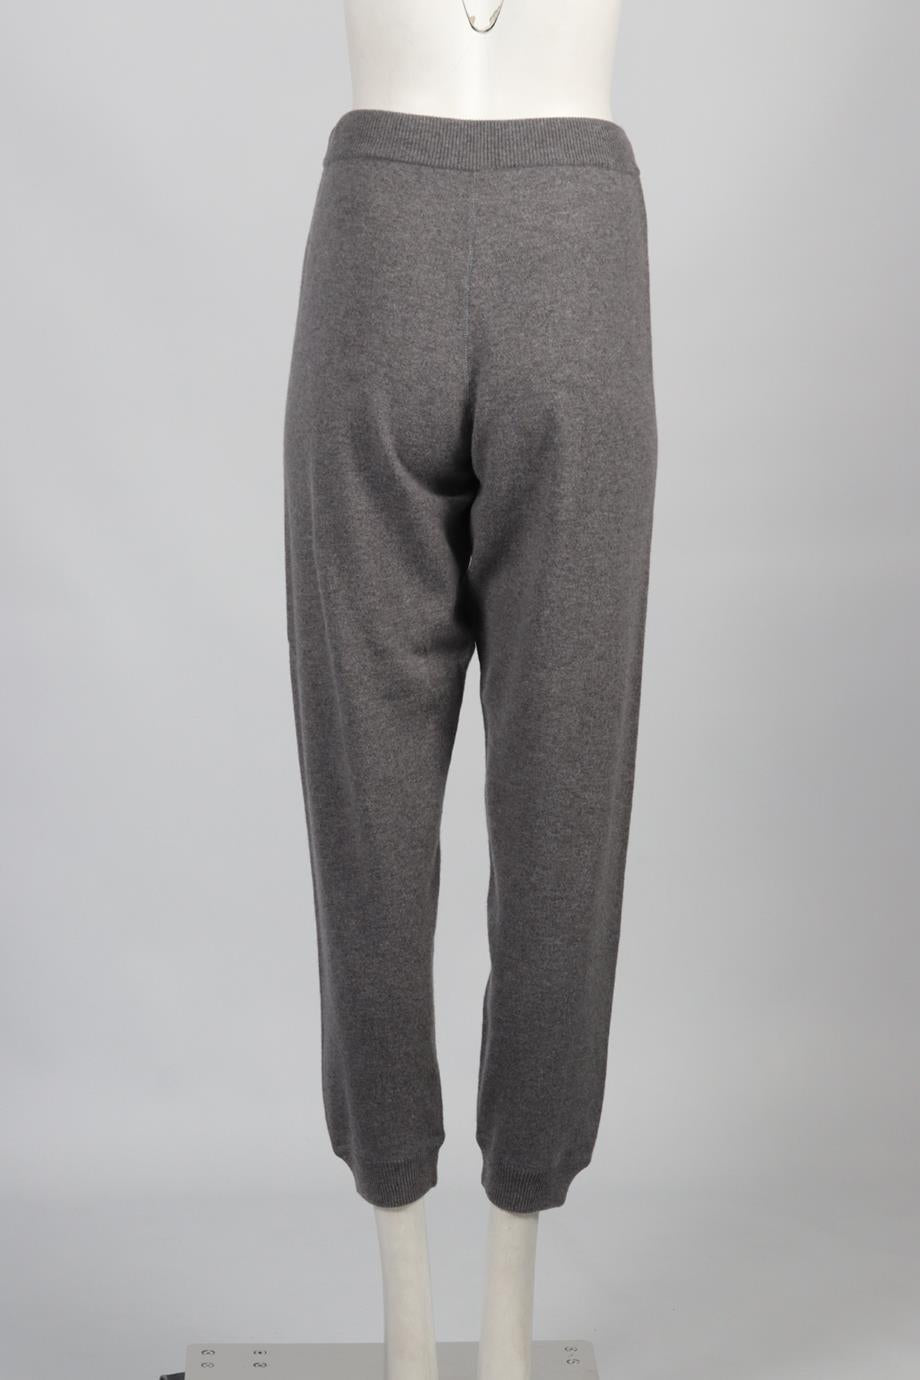 MONCLER WOOL AND CASHMERE BLEND TRACK PANTS XSMALL